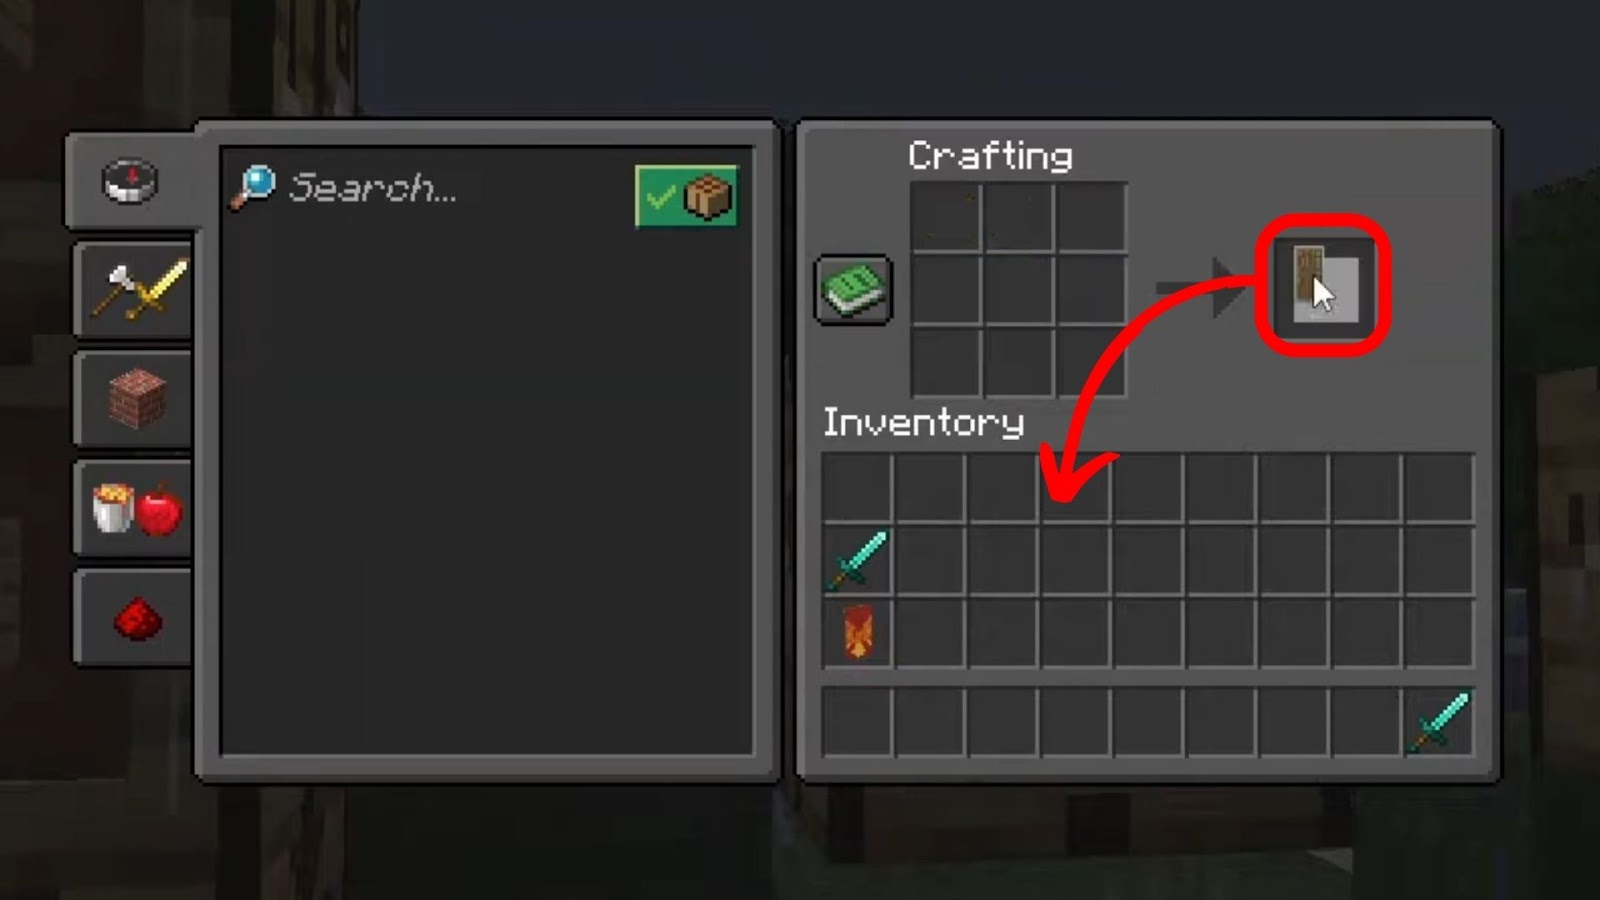 Move the Minecraft Shield to the Inventory